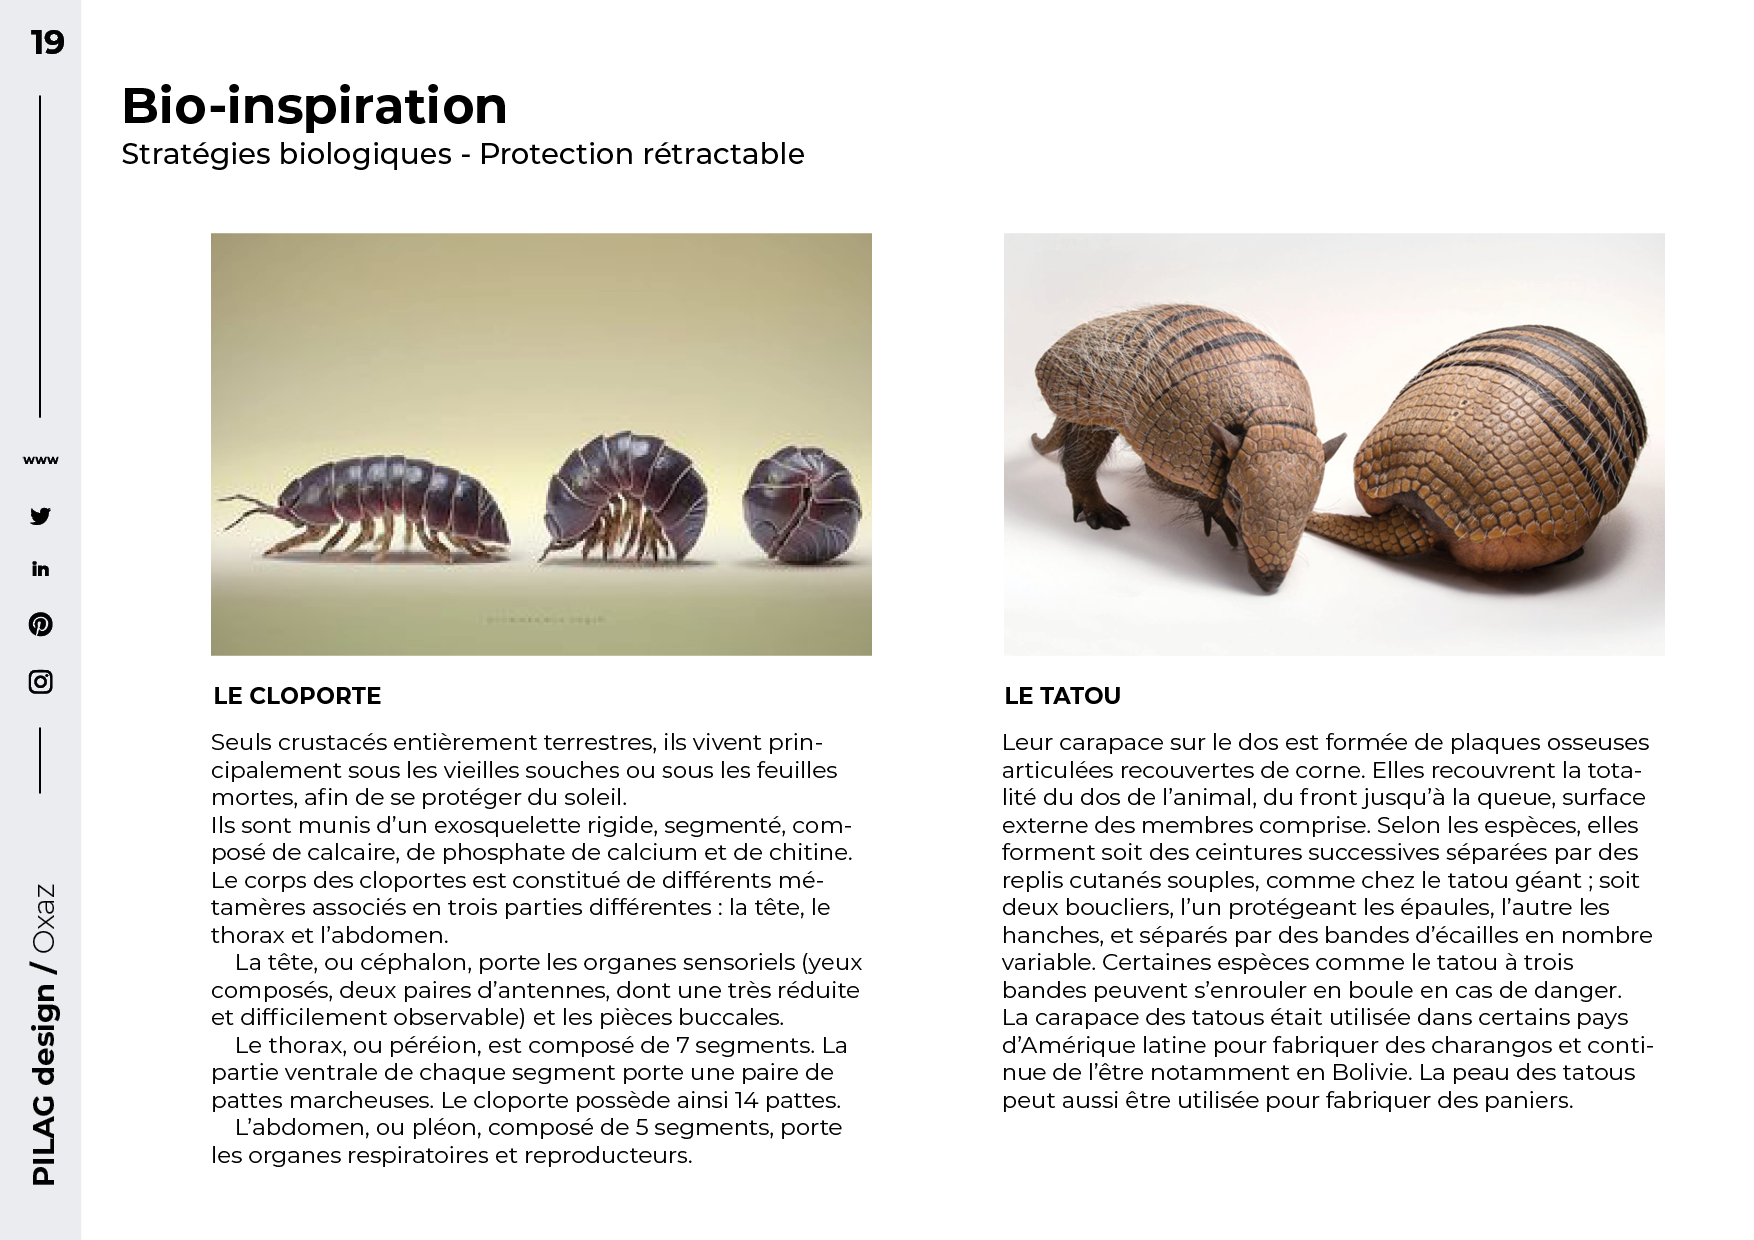 Biological-strategies-of-the-woodlouse-and-the-armadillo